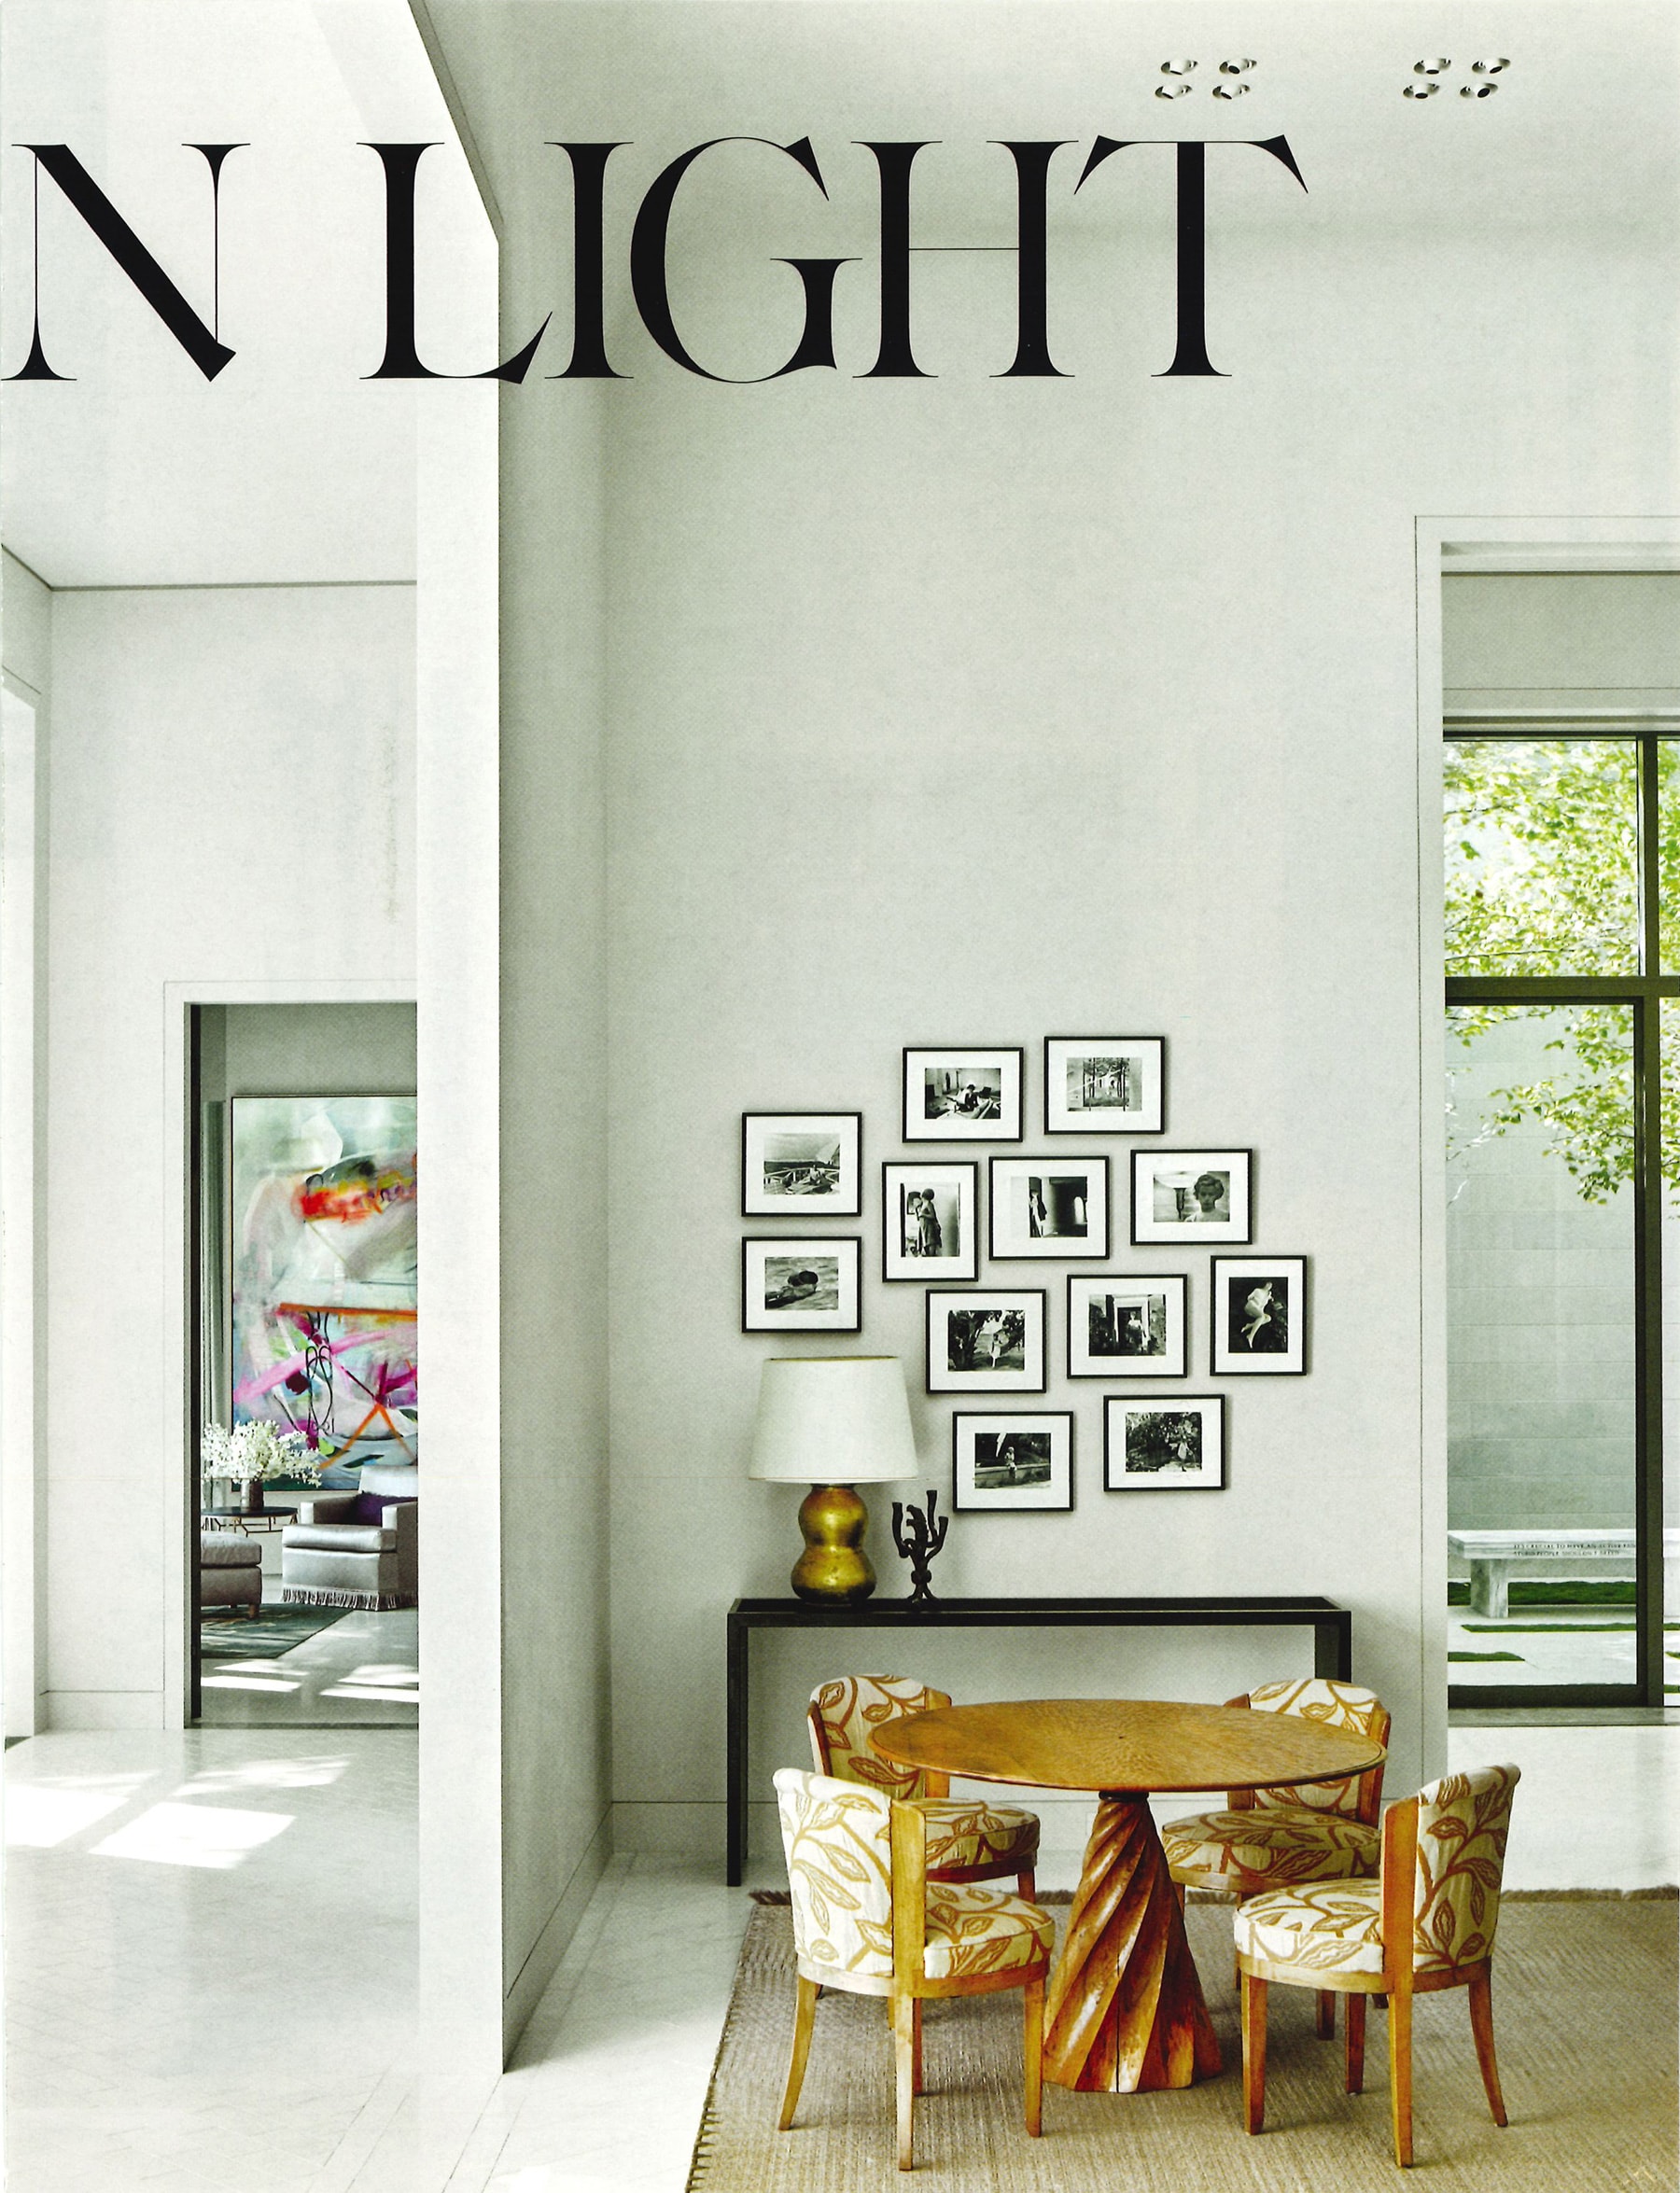 Architectural Digest Article